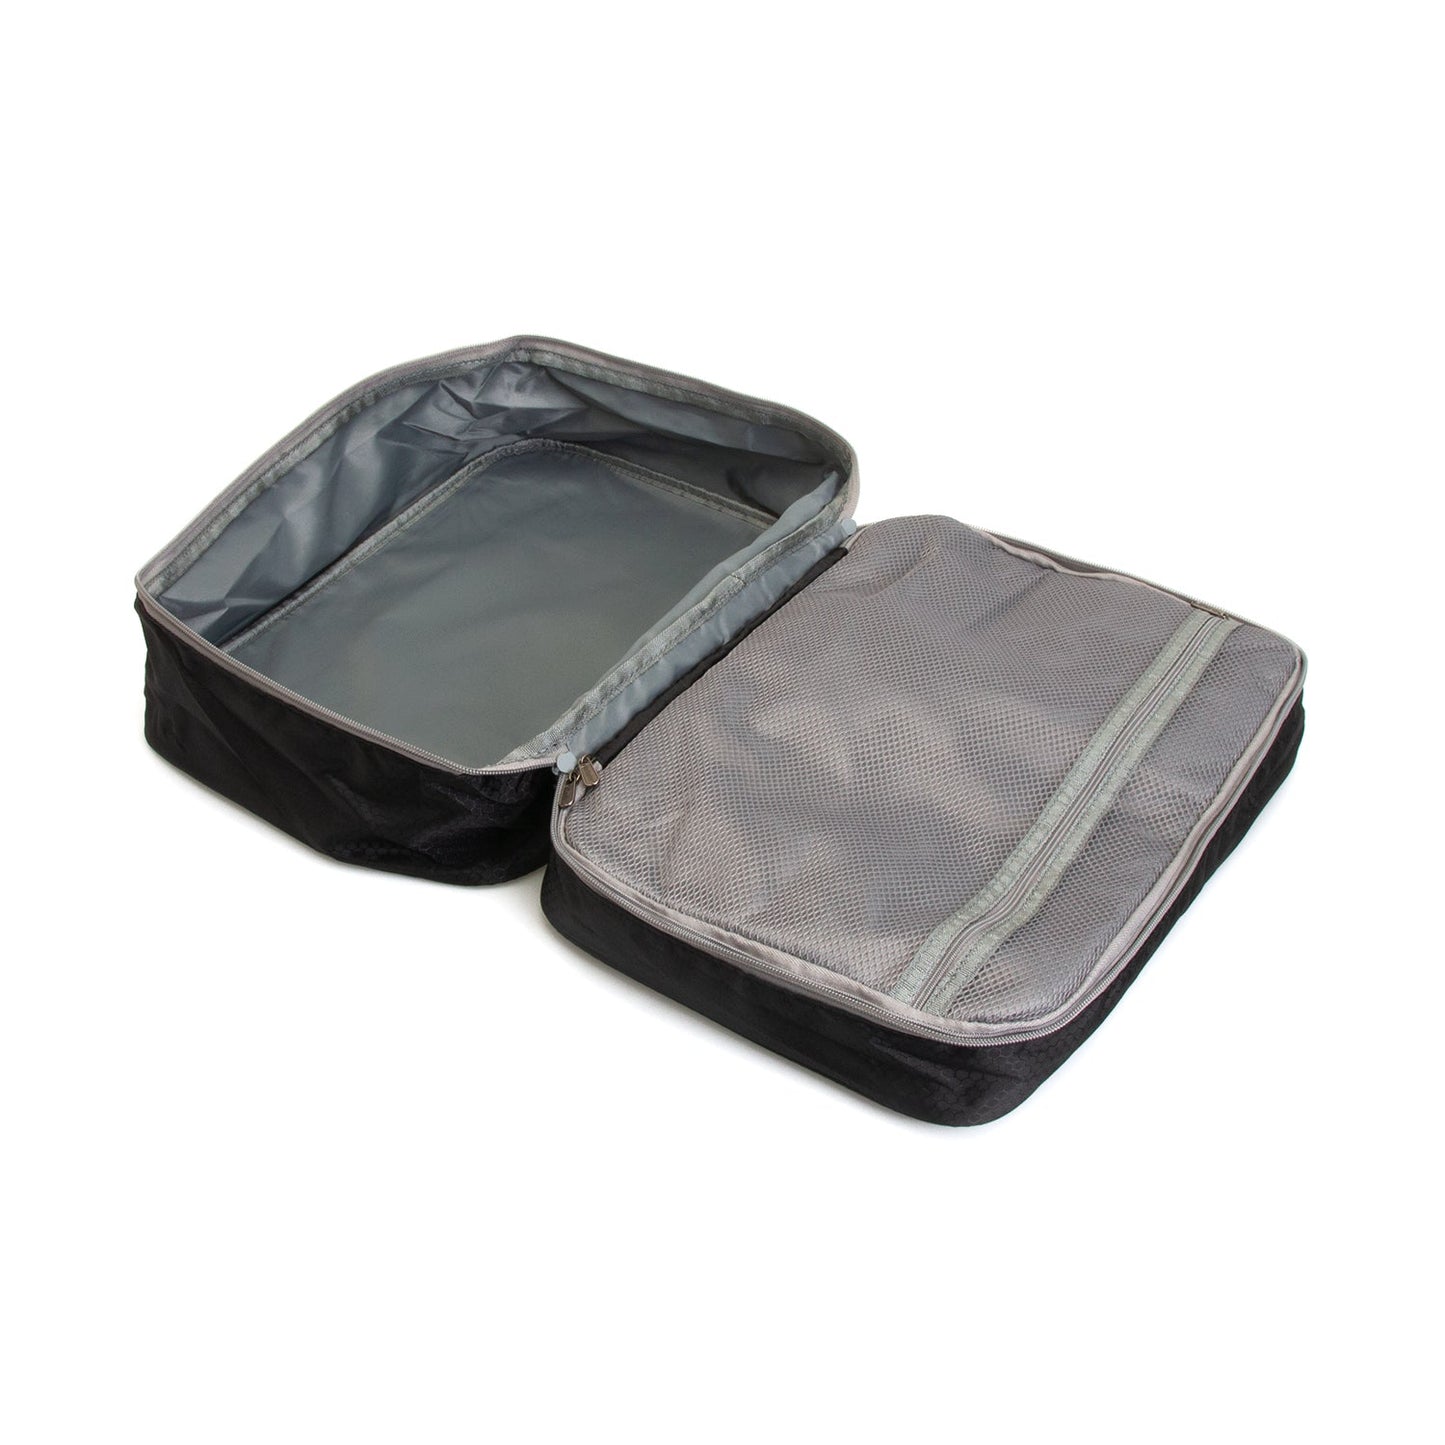 Dual Compartment Packing Cube